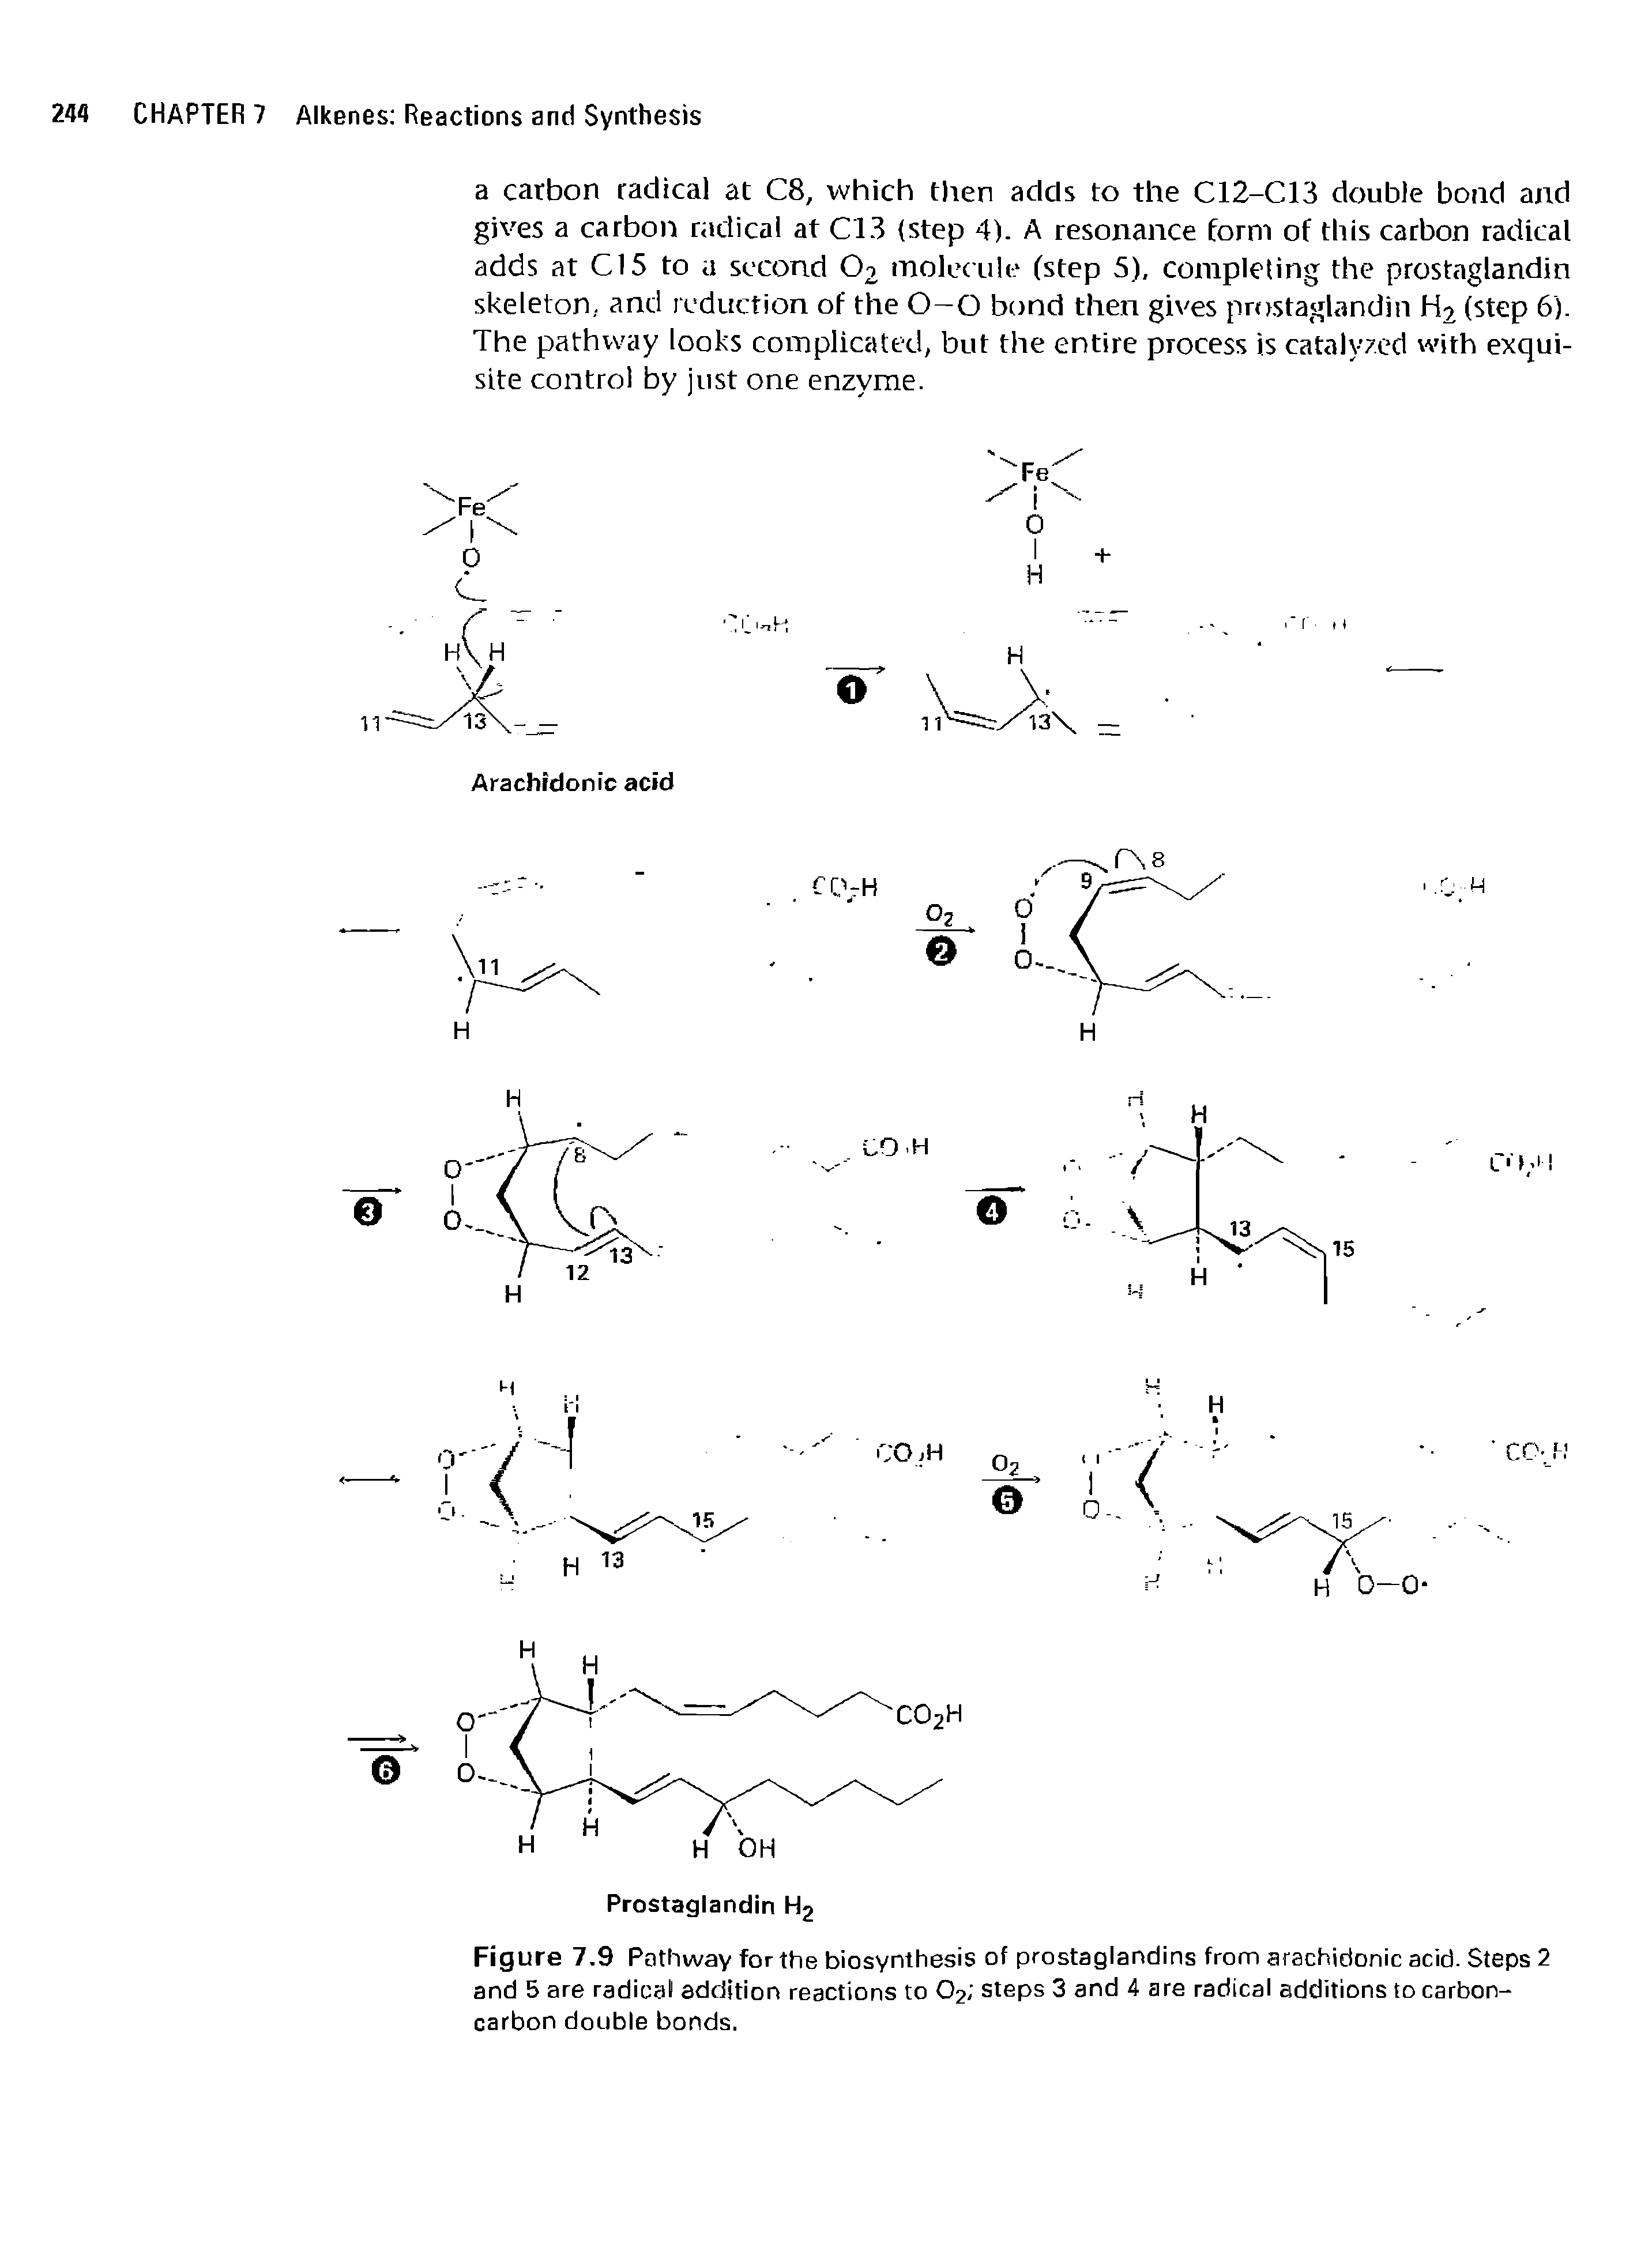 Figure 7.9 Pathway for the biosynthesis of prostaglandins from arachidonic acid. Steps 2 and 5 are radical addition reactions to 02 steps 3 and 4 are radical additions to carbon-carbon double bonds.